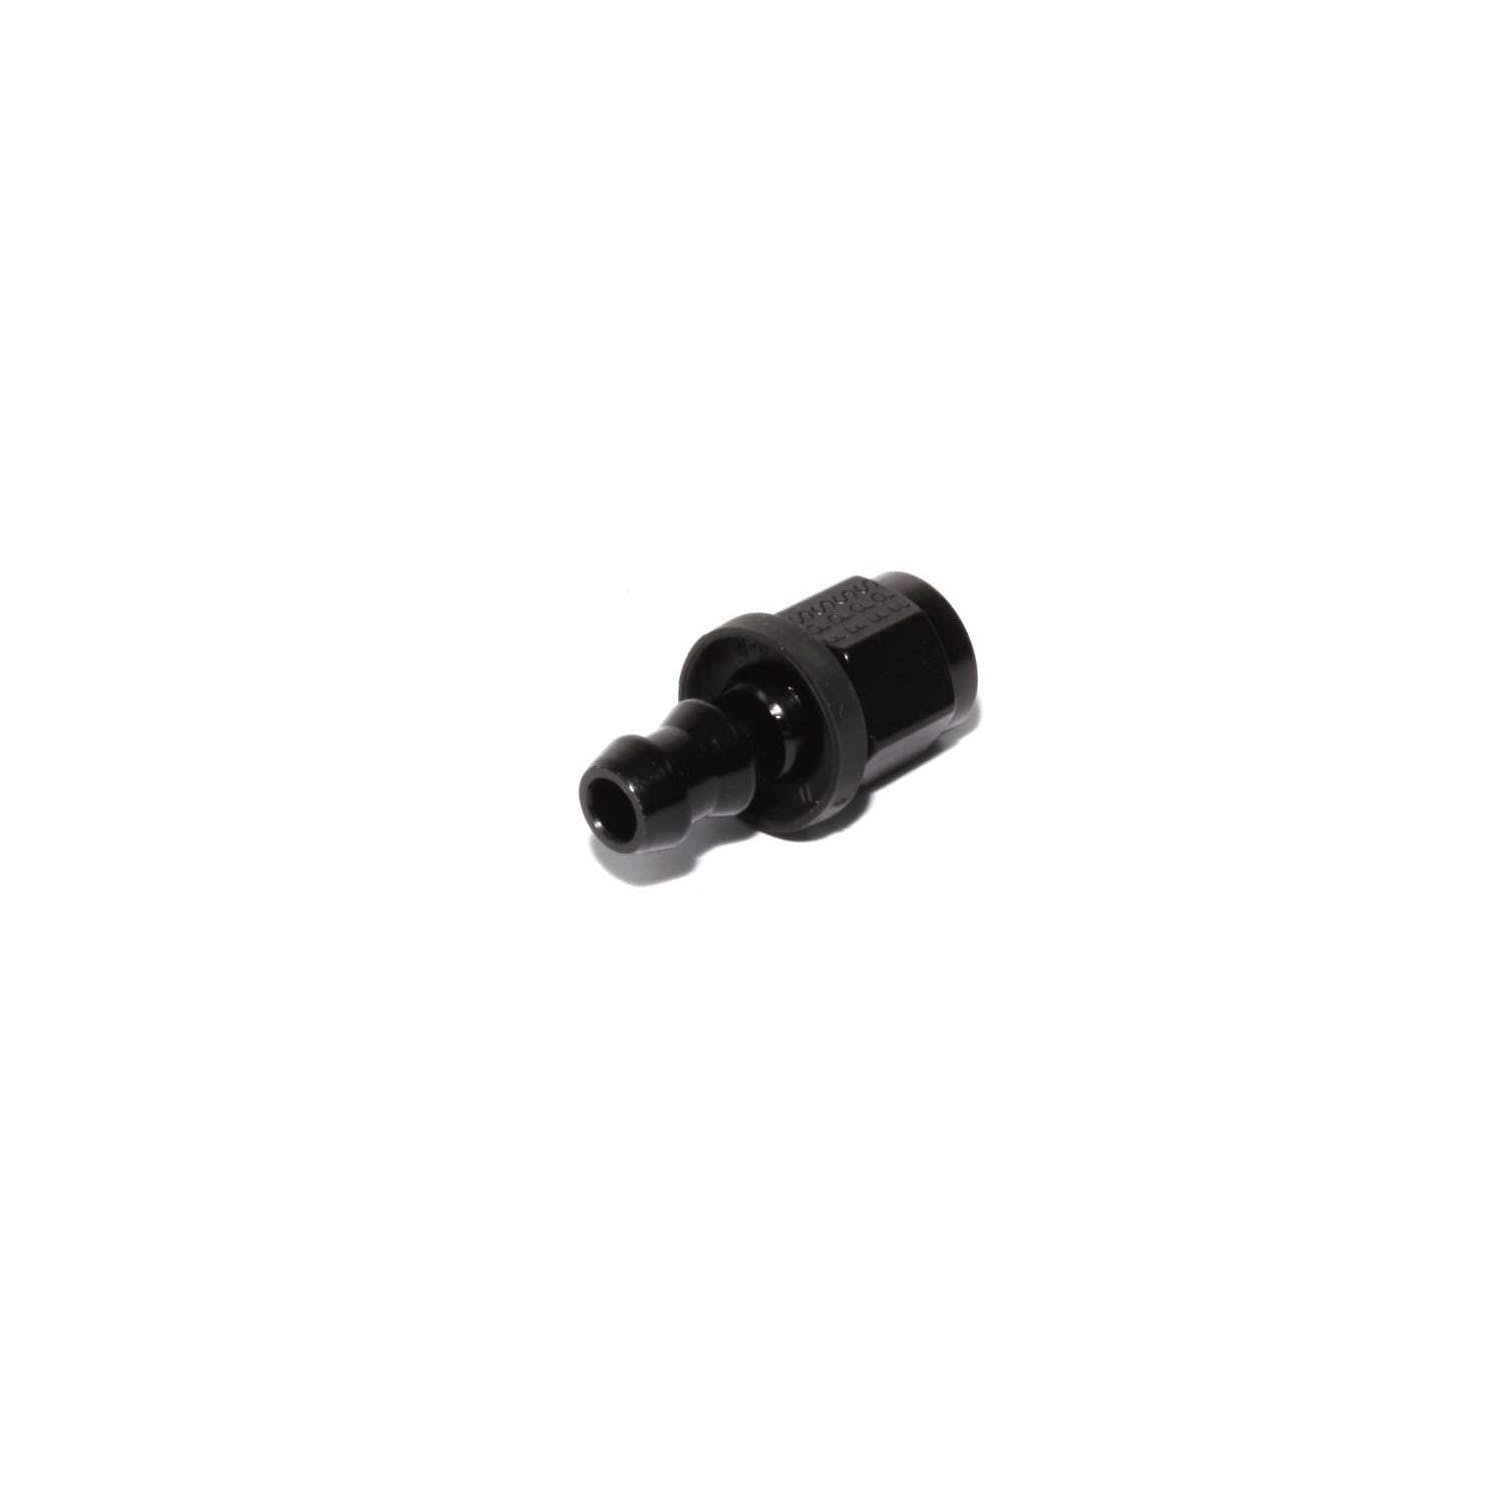 FAST - Fuel Air Spark Technology 30275 6AN Female to Straight Push-Lock Fitting